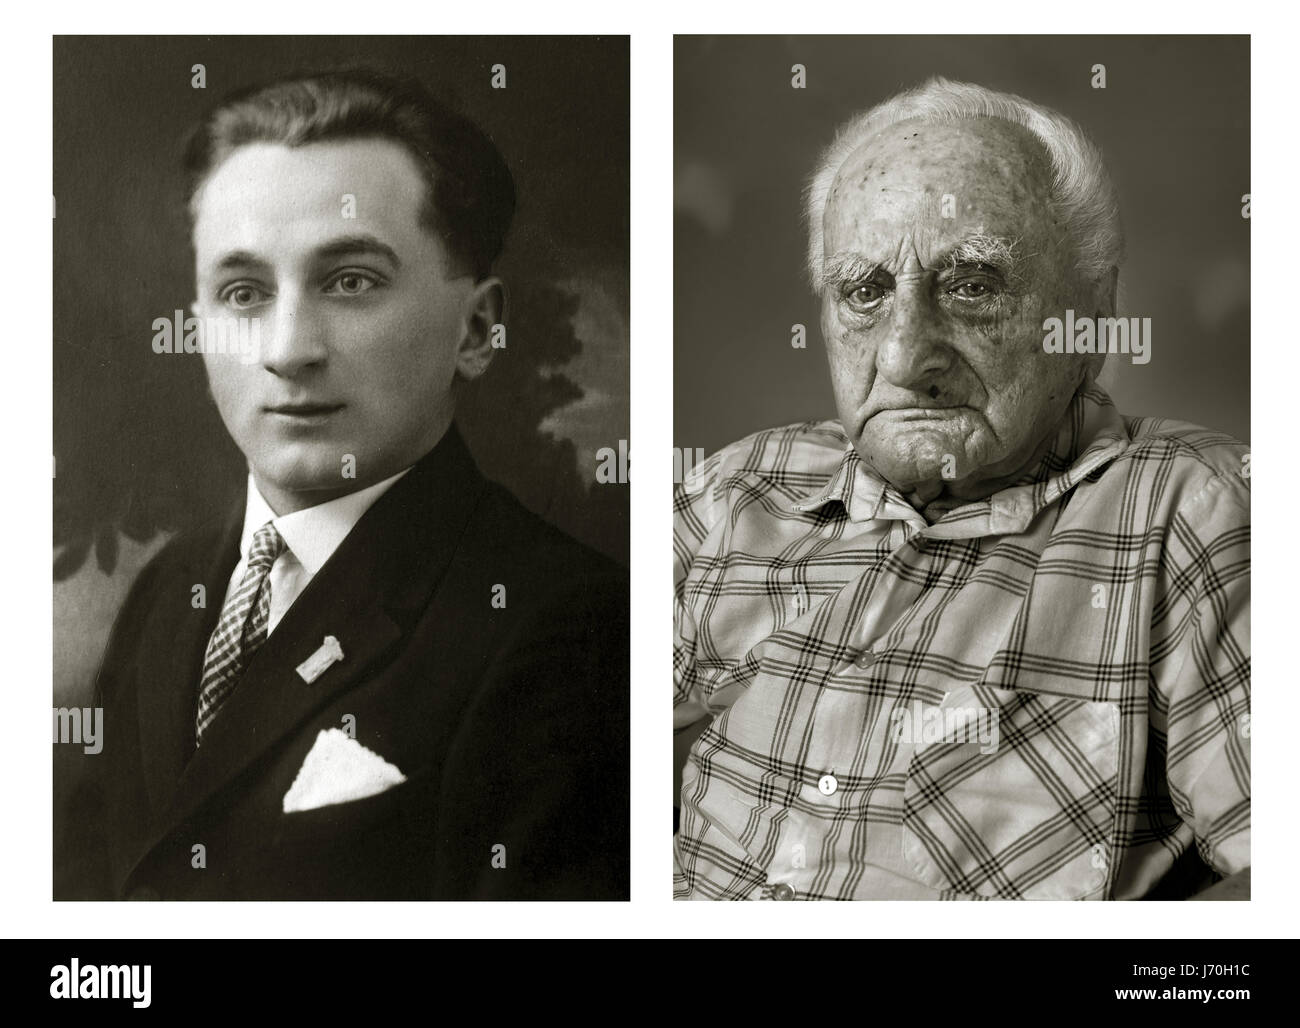 Ludvík Chybík. Left: 20 years old, right: 102 years old. He was a postman and now lives in a retirement home in Zlin. POIGNANT portraits have posed centenarians alongside their younger selves in a project called Faces of Century. The incredible images tell the unique stories of each person’s life including one woman who was in the truck that hit and killed high-ranking German Nazi official Reinhard Heydrich’s son Klaus in 1943. Another intriguing tale comes from a 101-year-old woman who decided to leave her luxury villa after turning 101 and burnt all material memories of her life including le Stock Photo